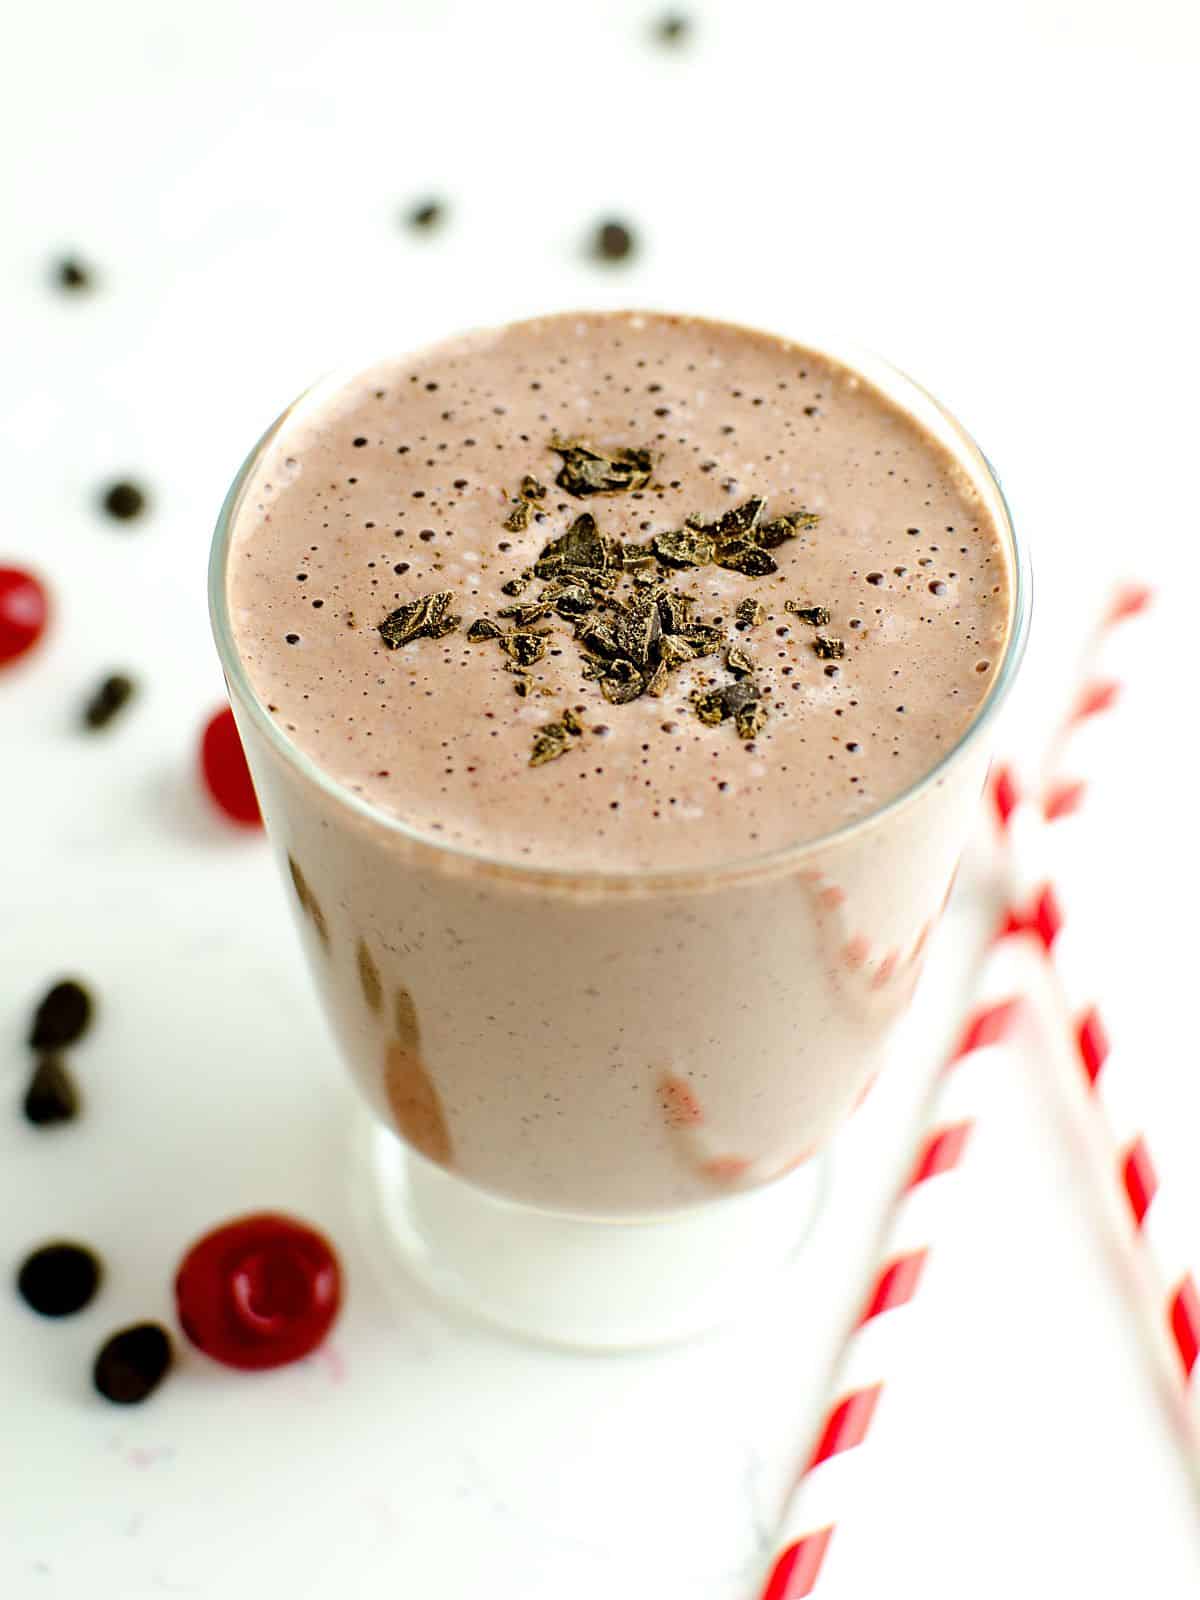 Chocolate covered cherry protein smoothie topped with dark chocolate shavings.